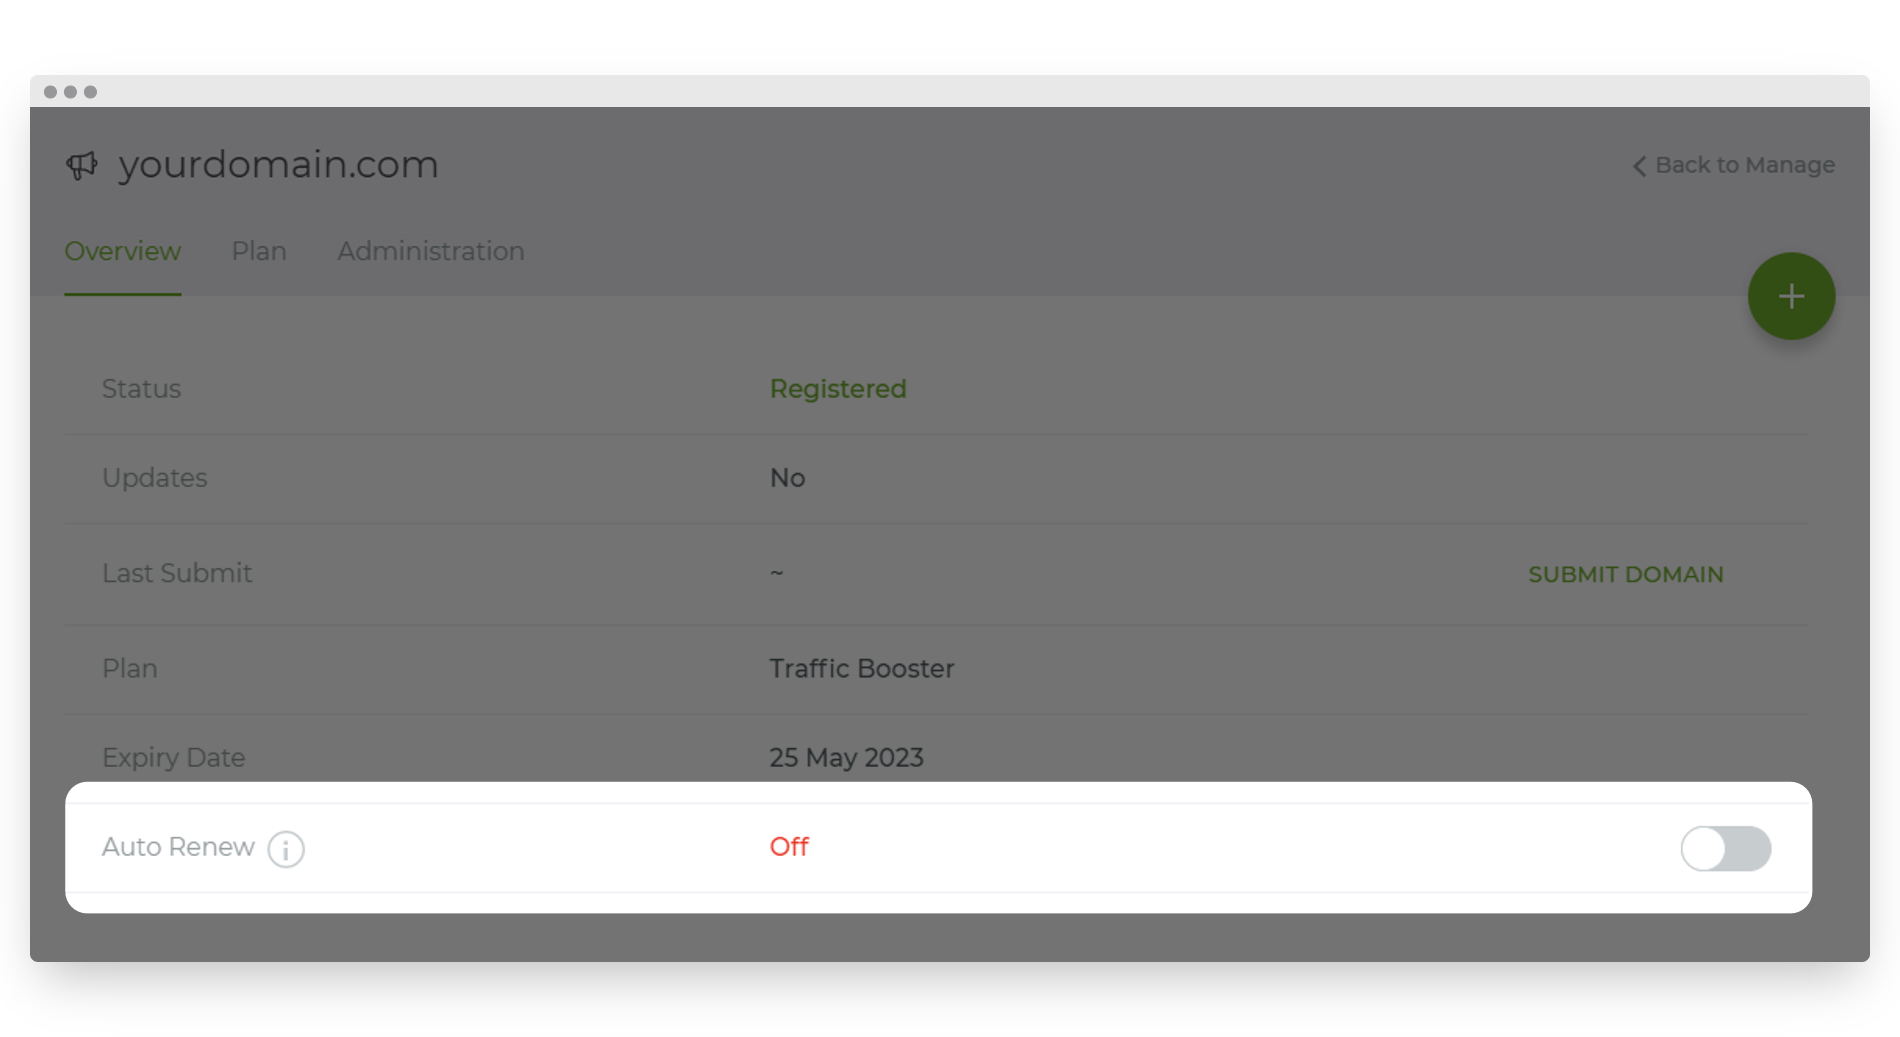 Screenshot of Crazy Domains Product or Service Auto Renewal Settings